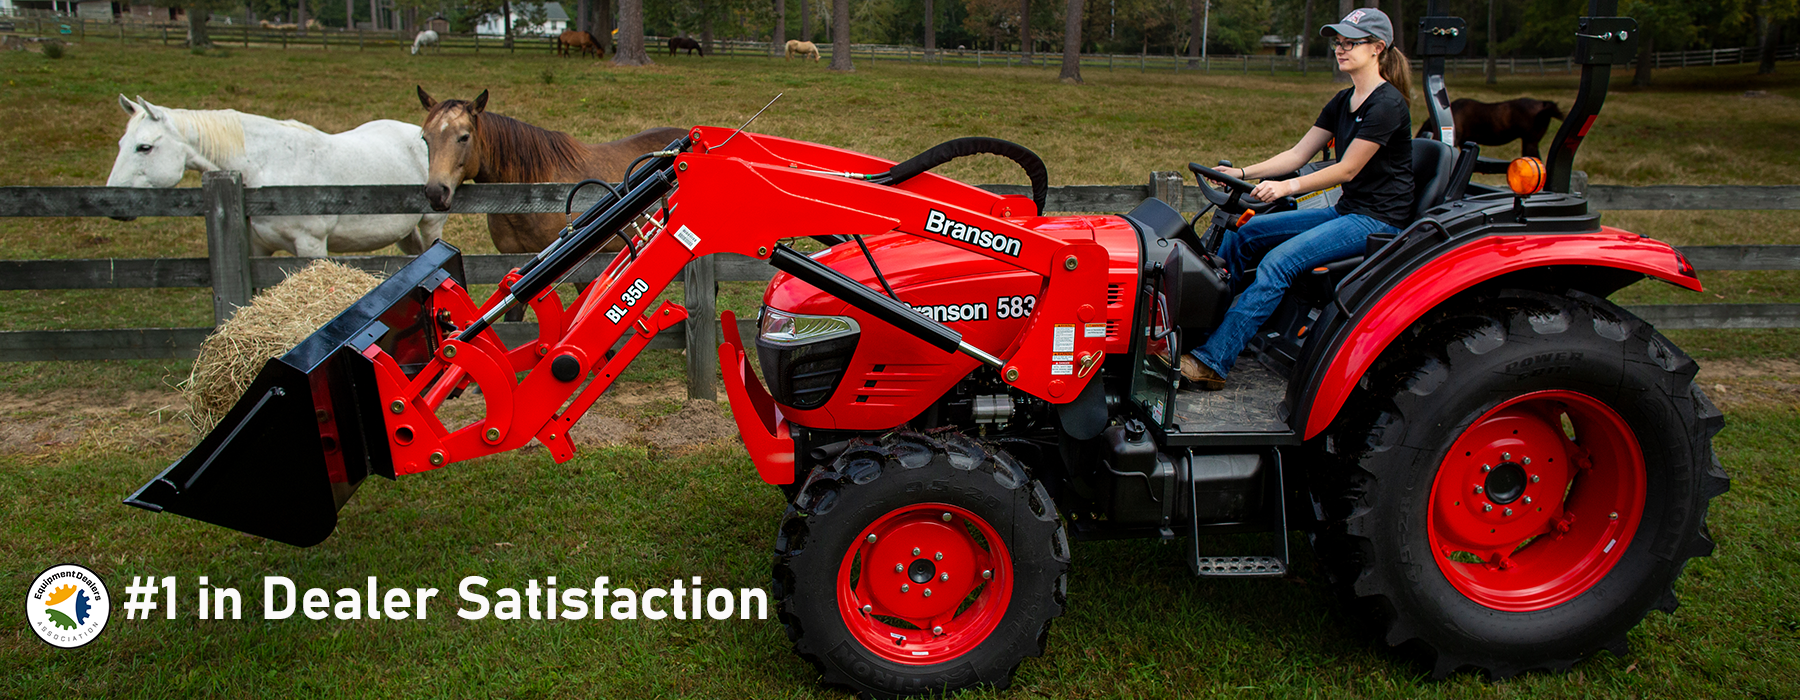 Detail Images Of Tractor Nomer 57